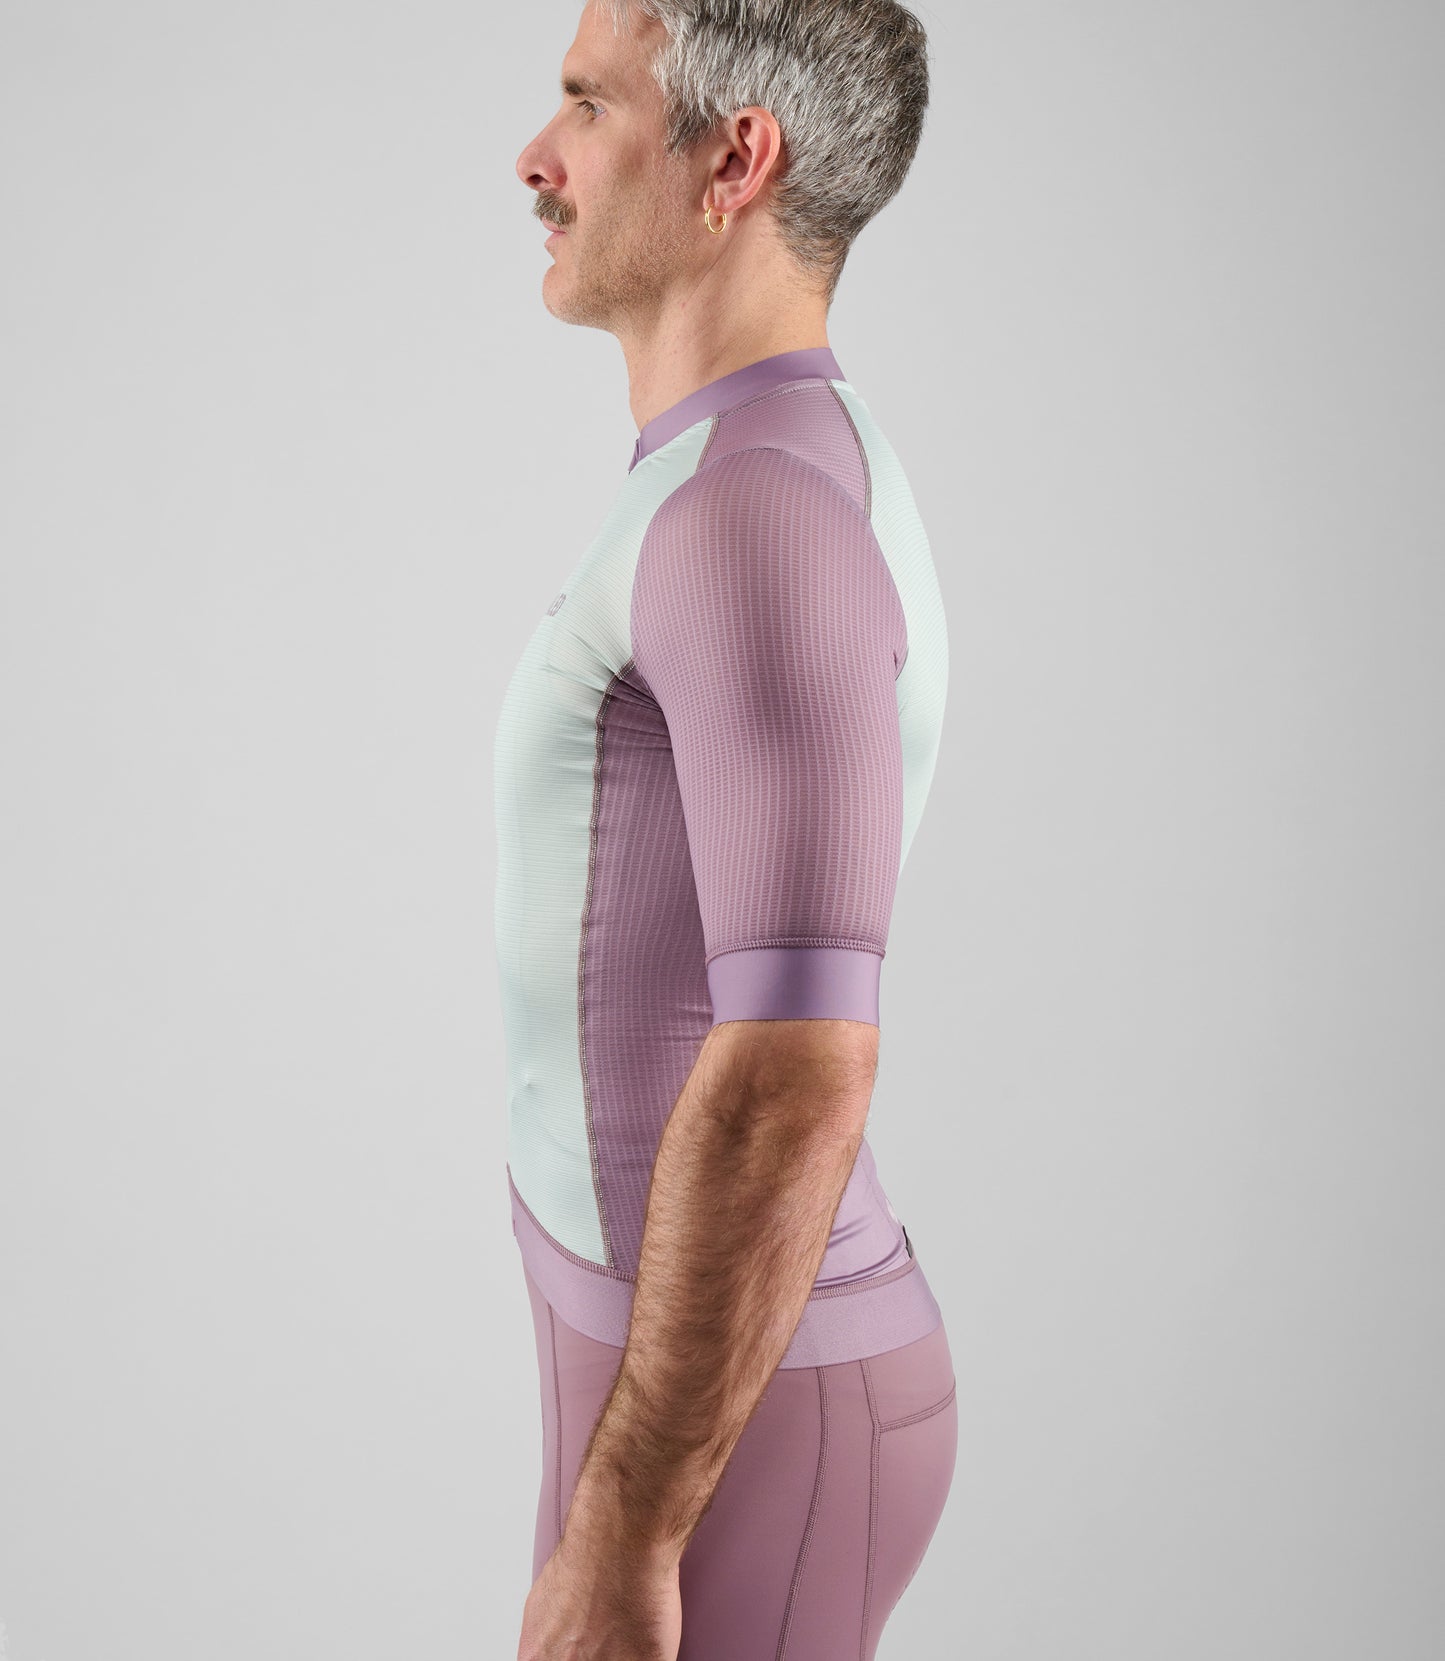 PEDALED Element Jersey (Lilac)